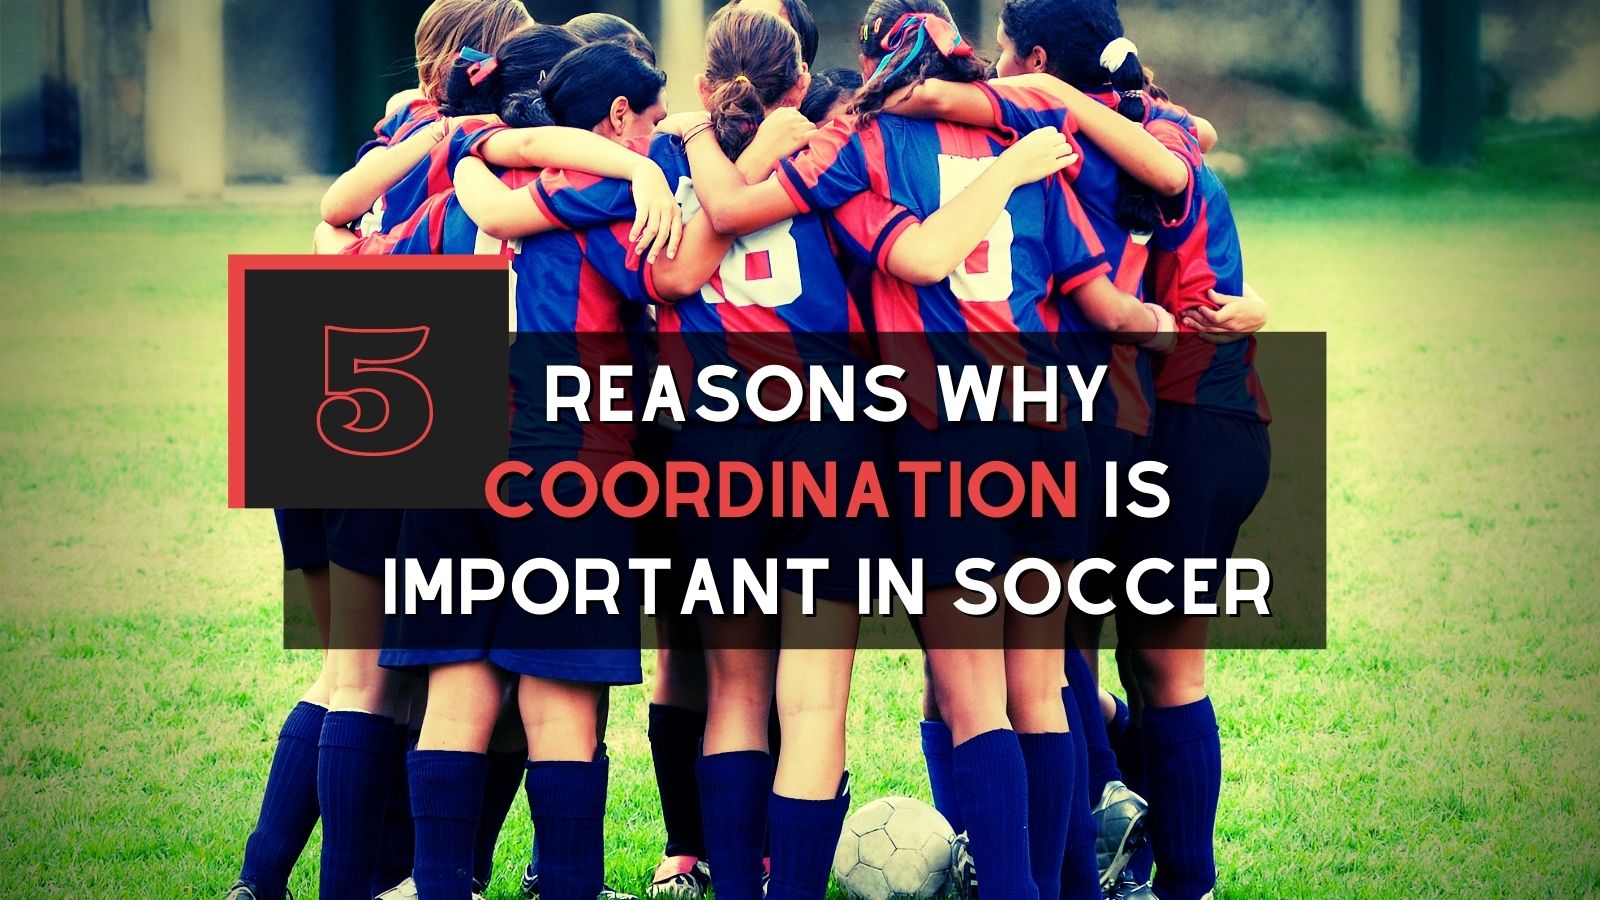 5 Reasons Why Coordination Is Important In Football (Soccer)